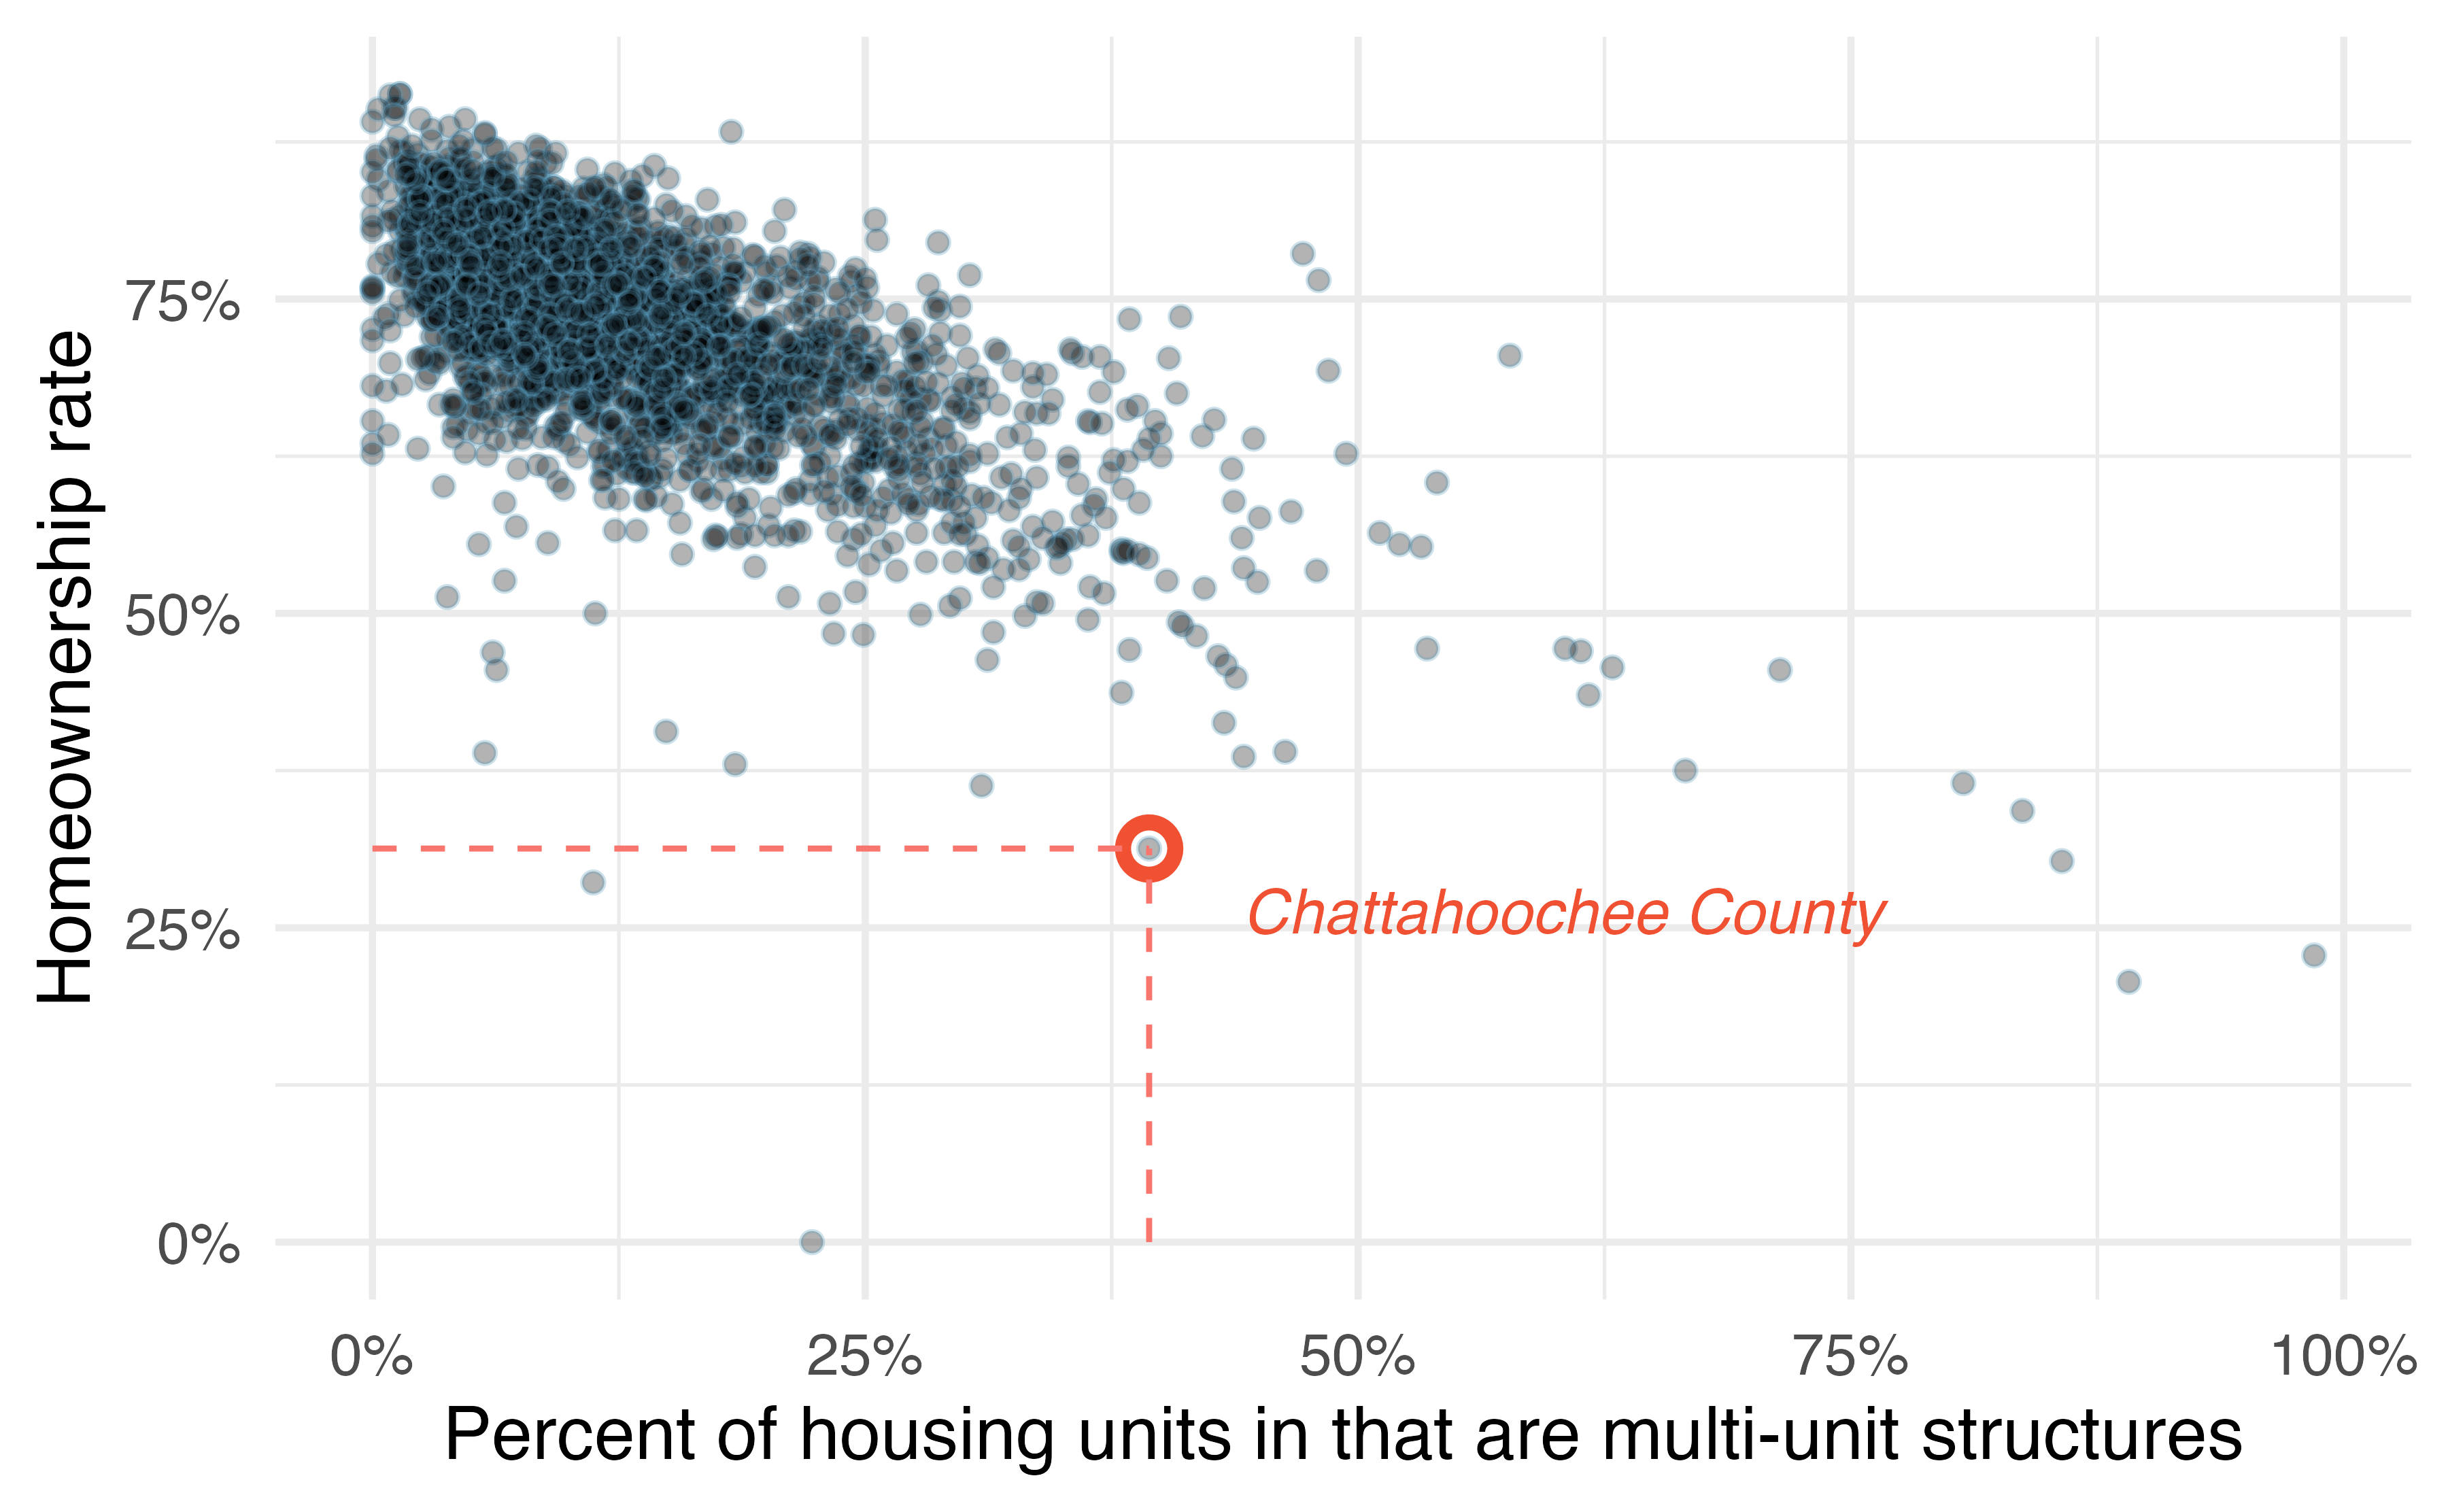 A scatterplot of homeownership versus the percent of housing units that are in multi-unit structures for US counties. The highlighted dot represents Chattahoochee County, Georgia, which has a multi-unit rate of 39.4\% and a homeownership rate of 31.3\%.